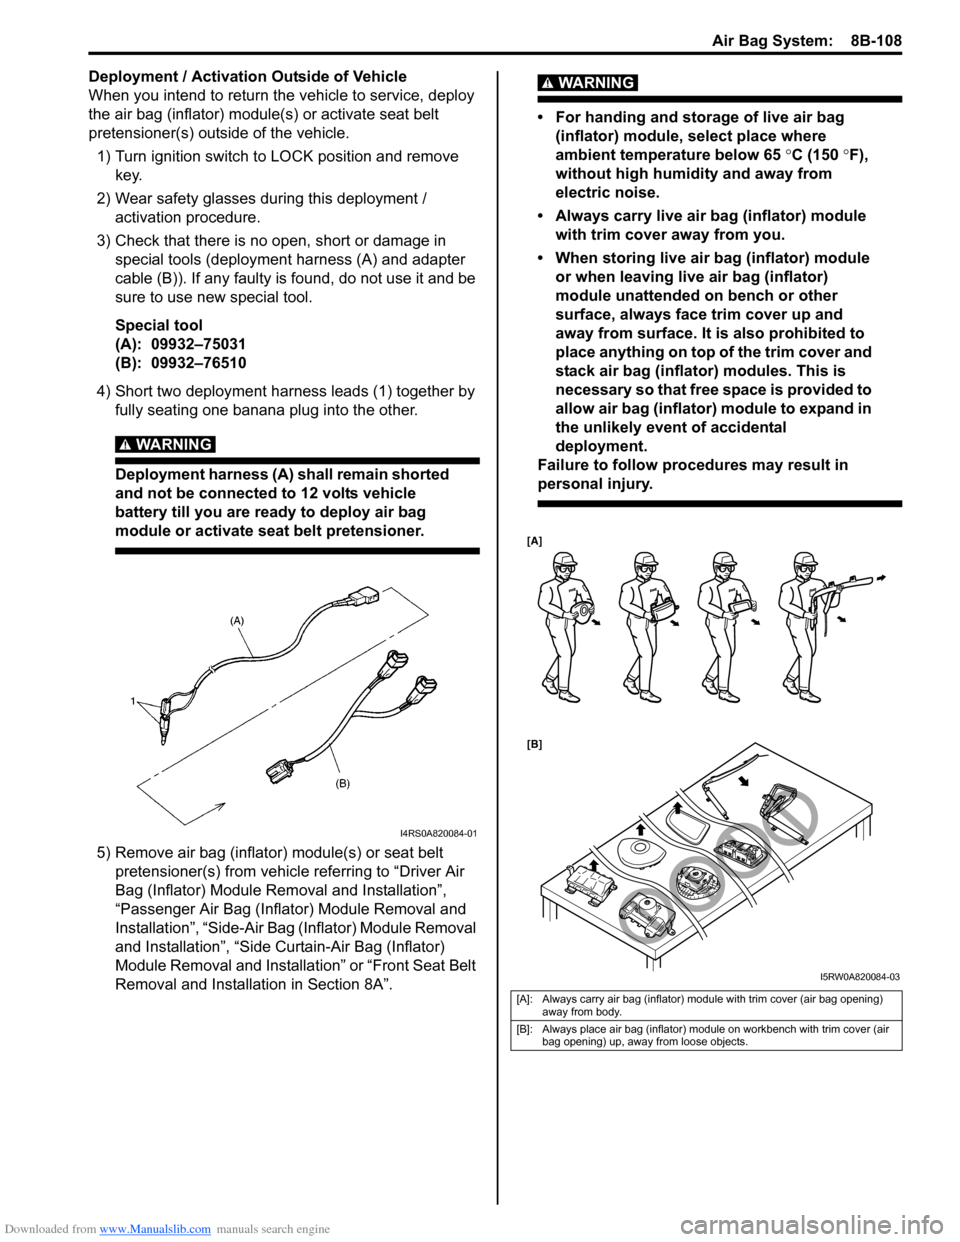 SUZUKI SX4 2006 1.G Service Workshop Manual Downloaded from www.Manualslib.com manuals search engine Air Bag System:  8B-108
Deployment / Activation Outside of Vehicle
When you intend to return the vehicle to service, deploy 
the air bag (infla